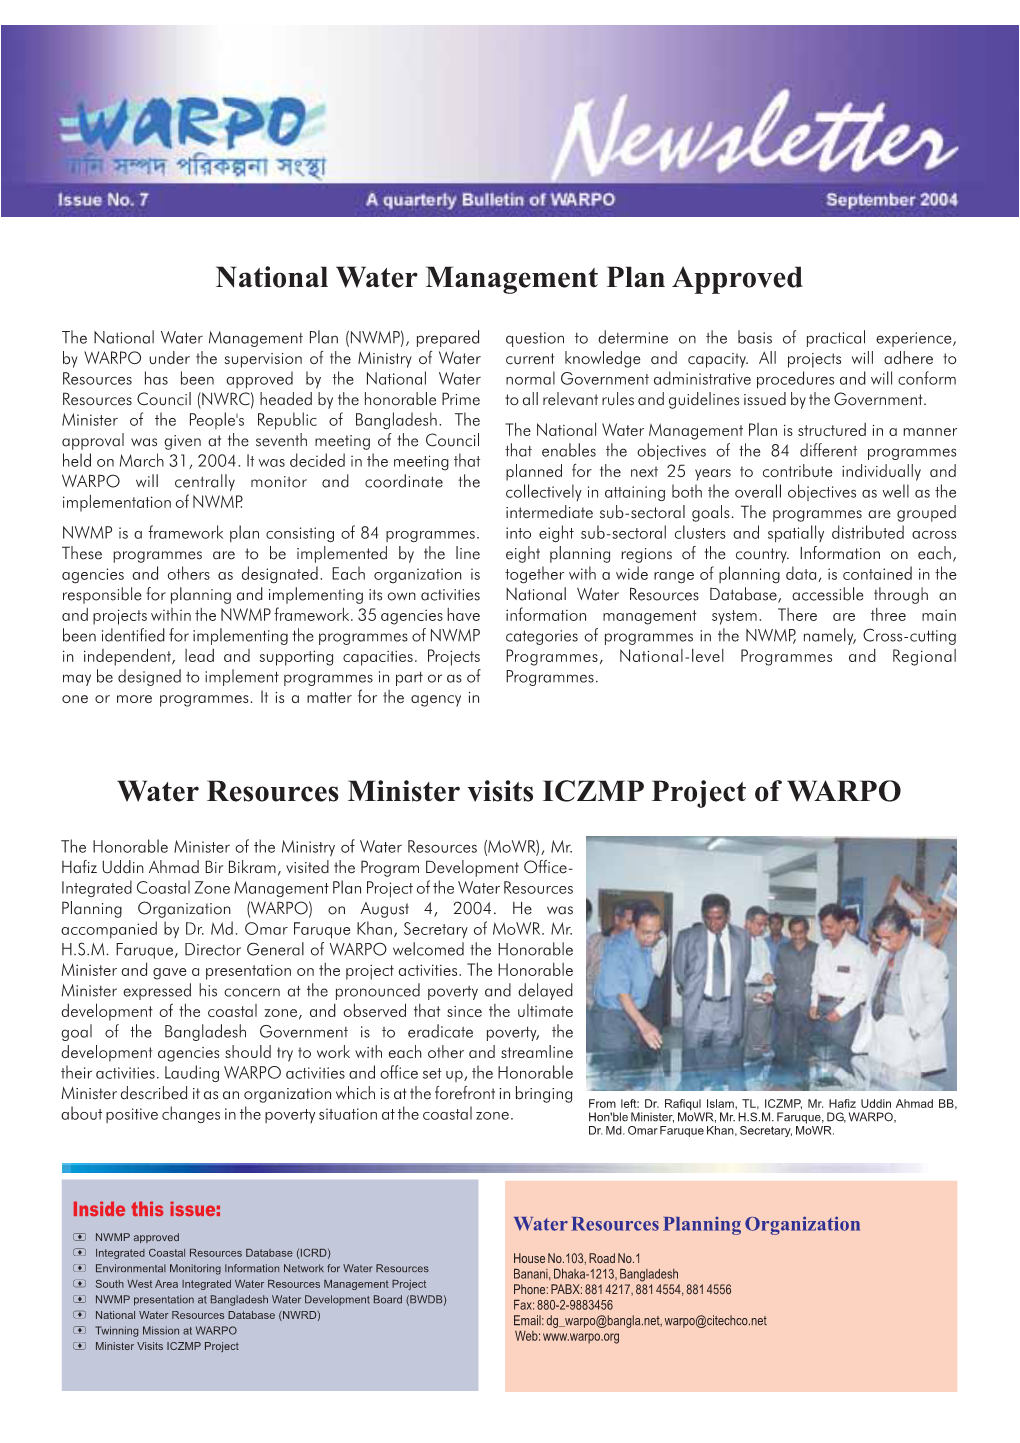 National Water Management Plan Approved